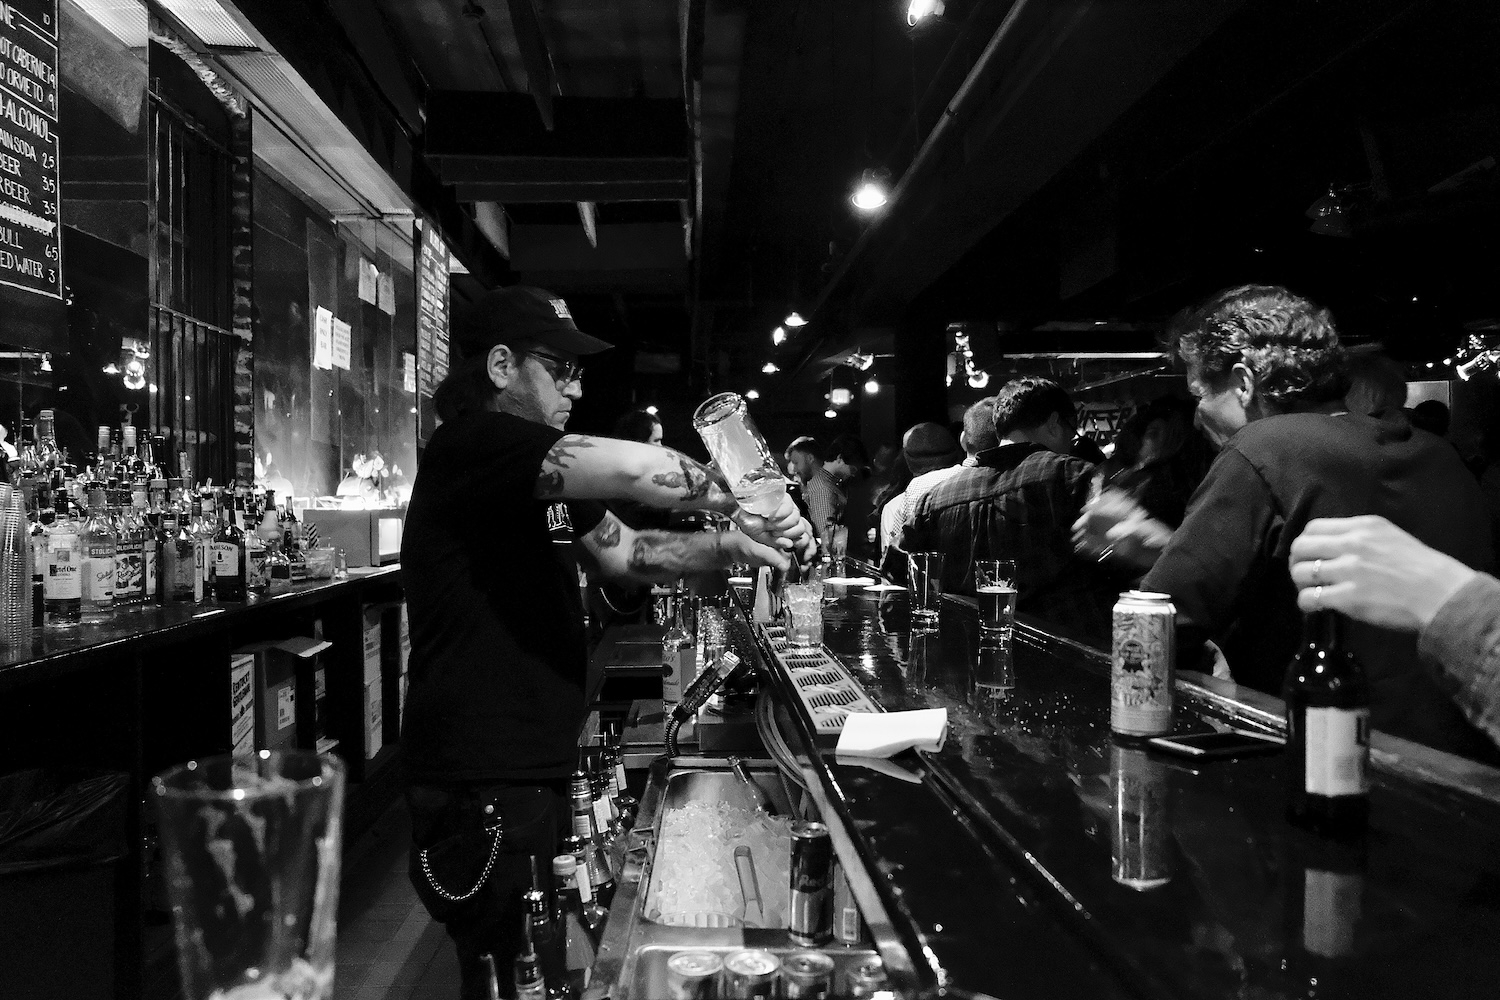 bartender pouring drink, black and white image,